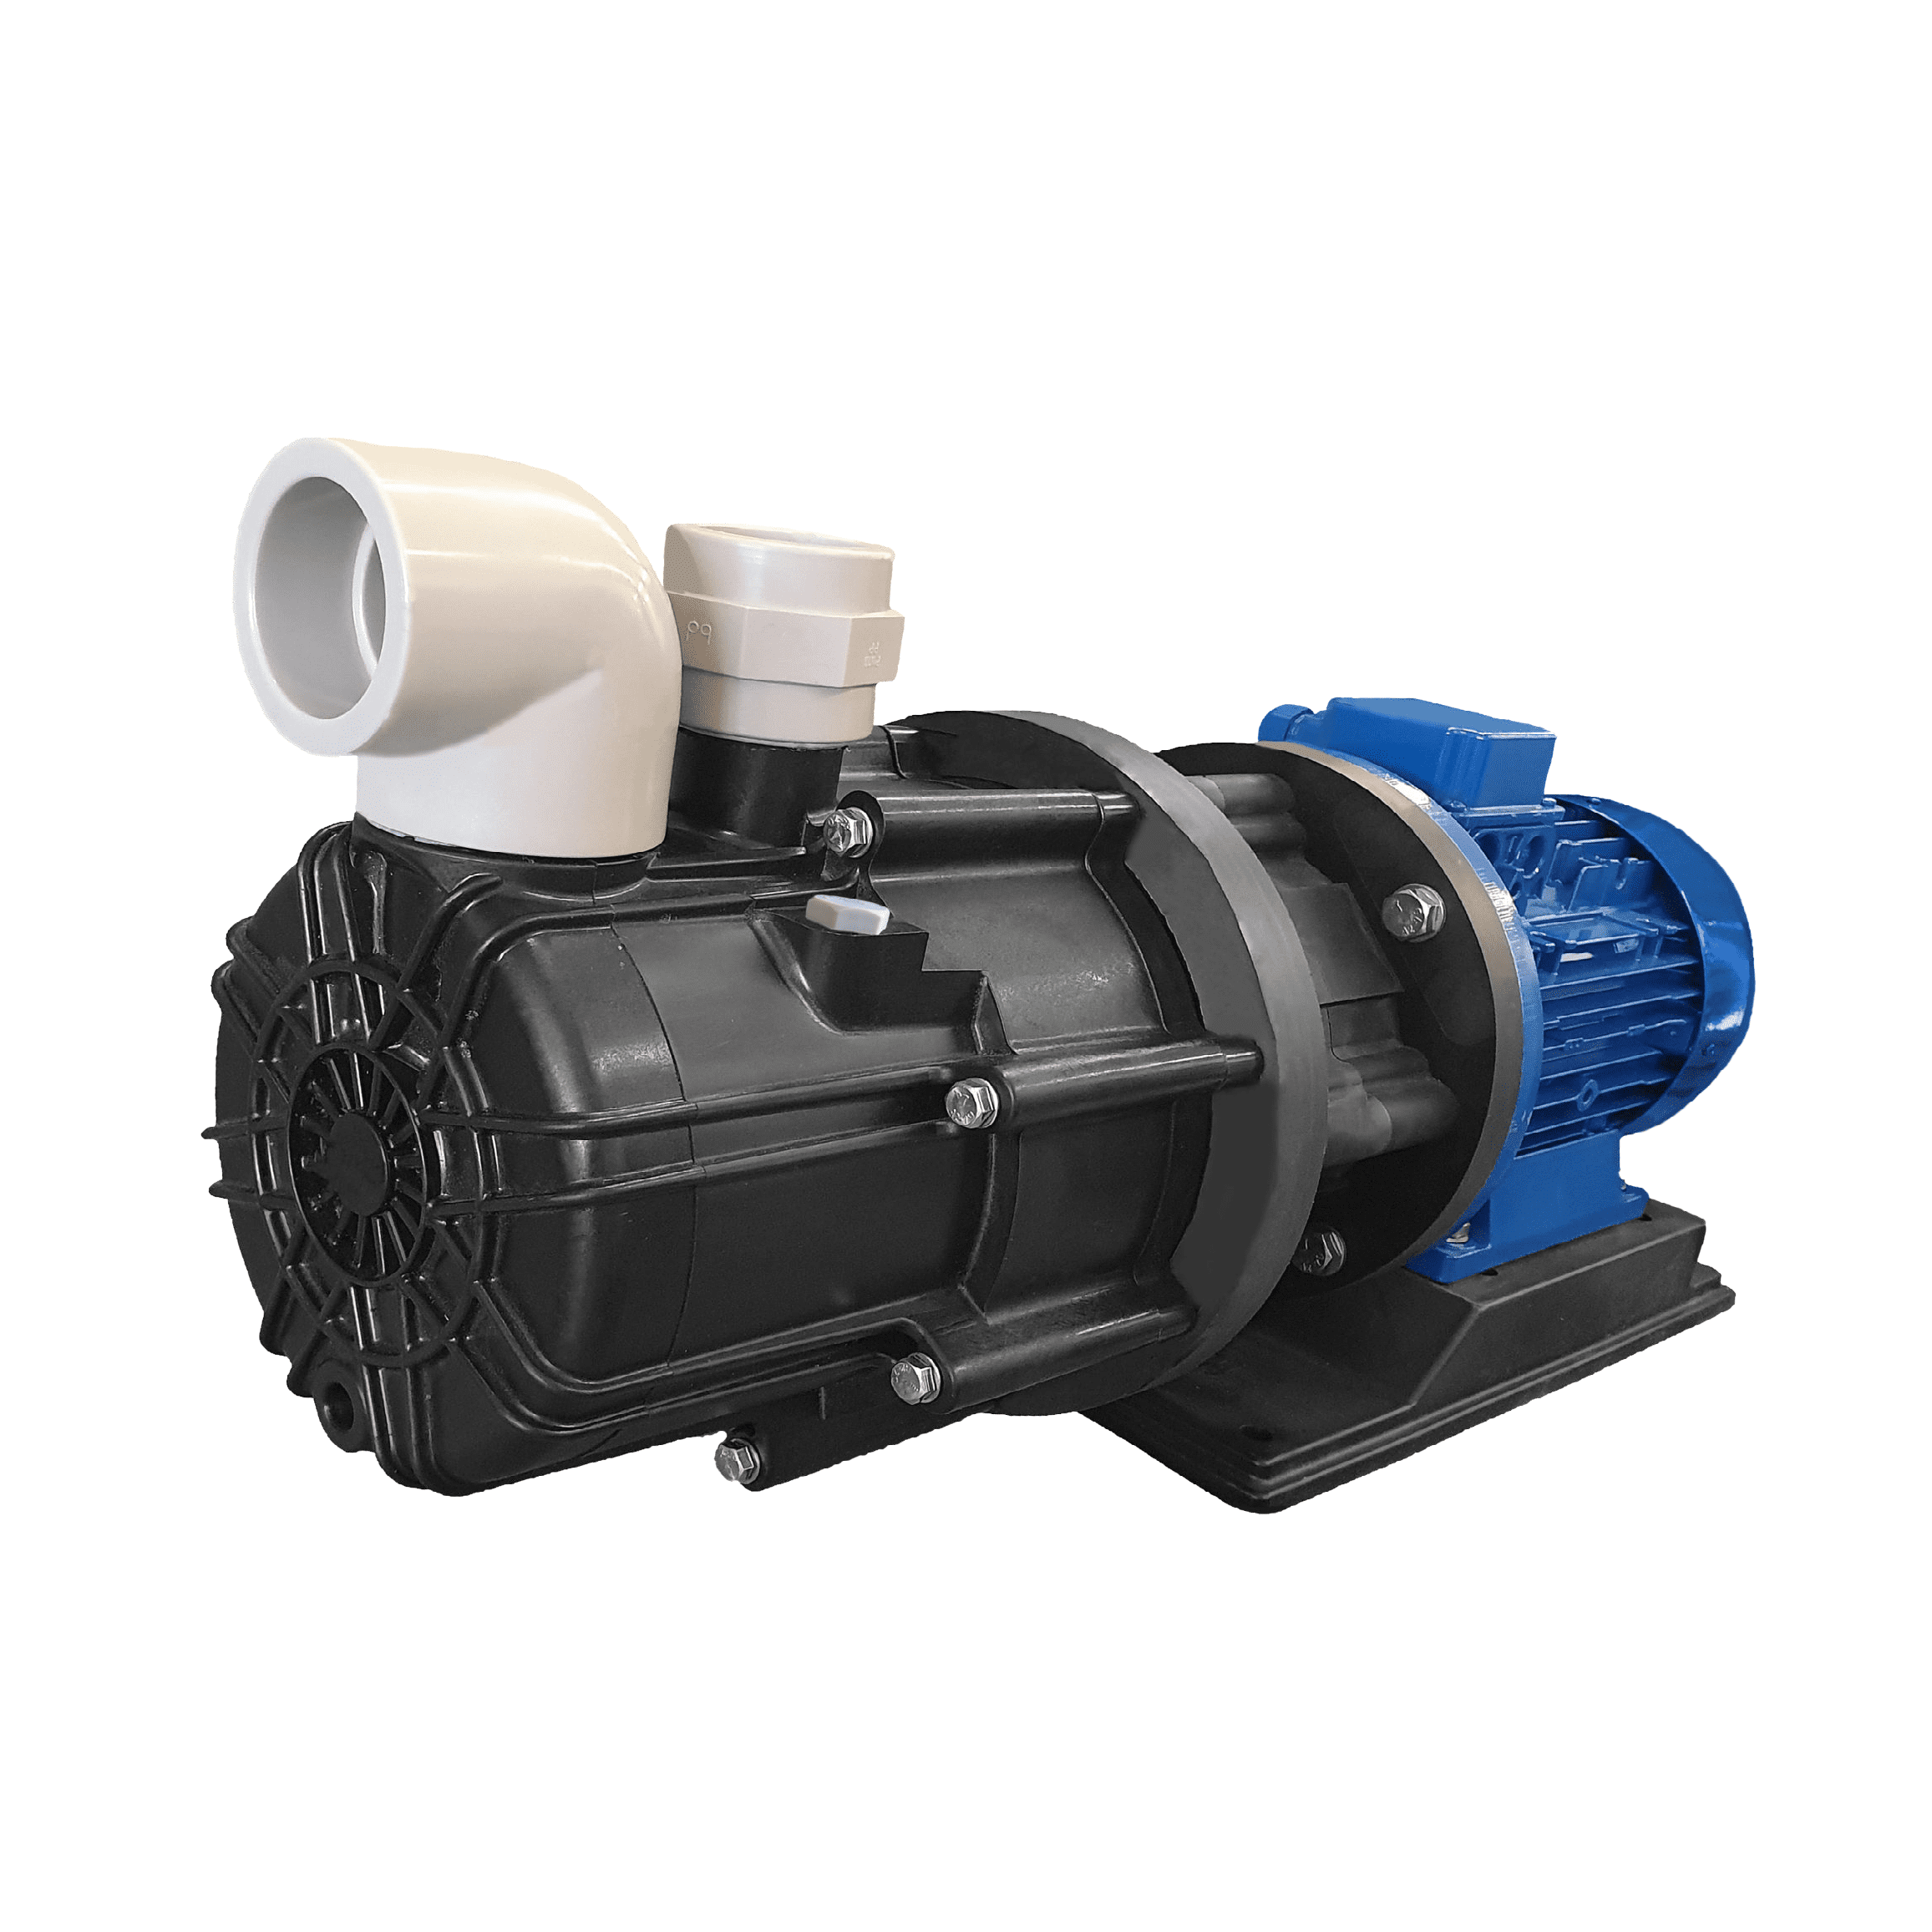 HTM SP Self-priming magnetic drive centrifugal pumps in thermoplastic materials